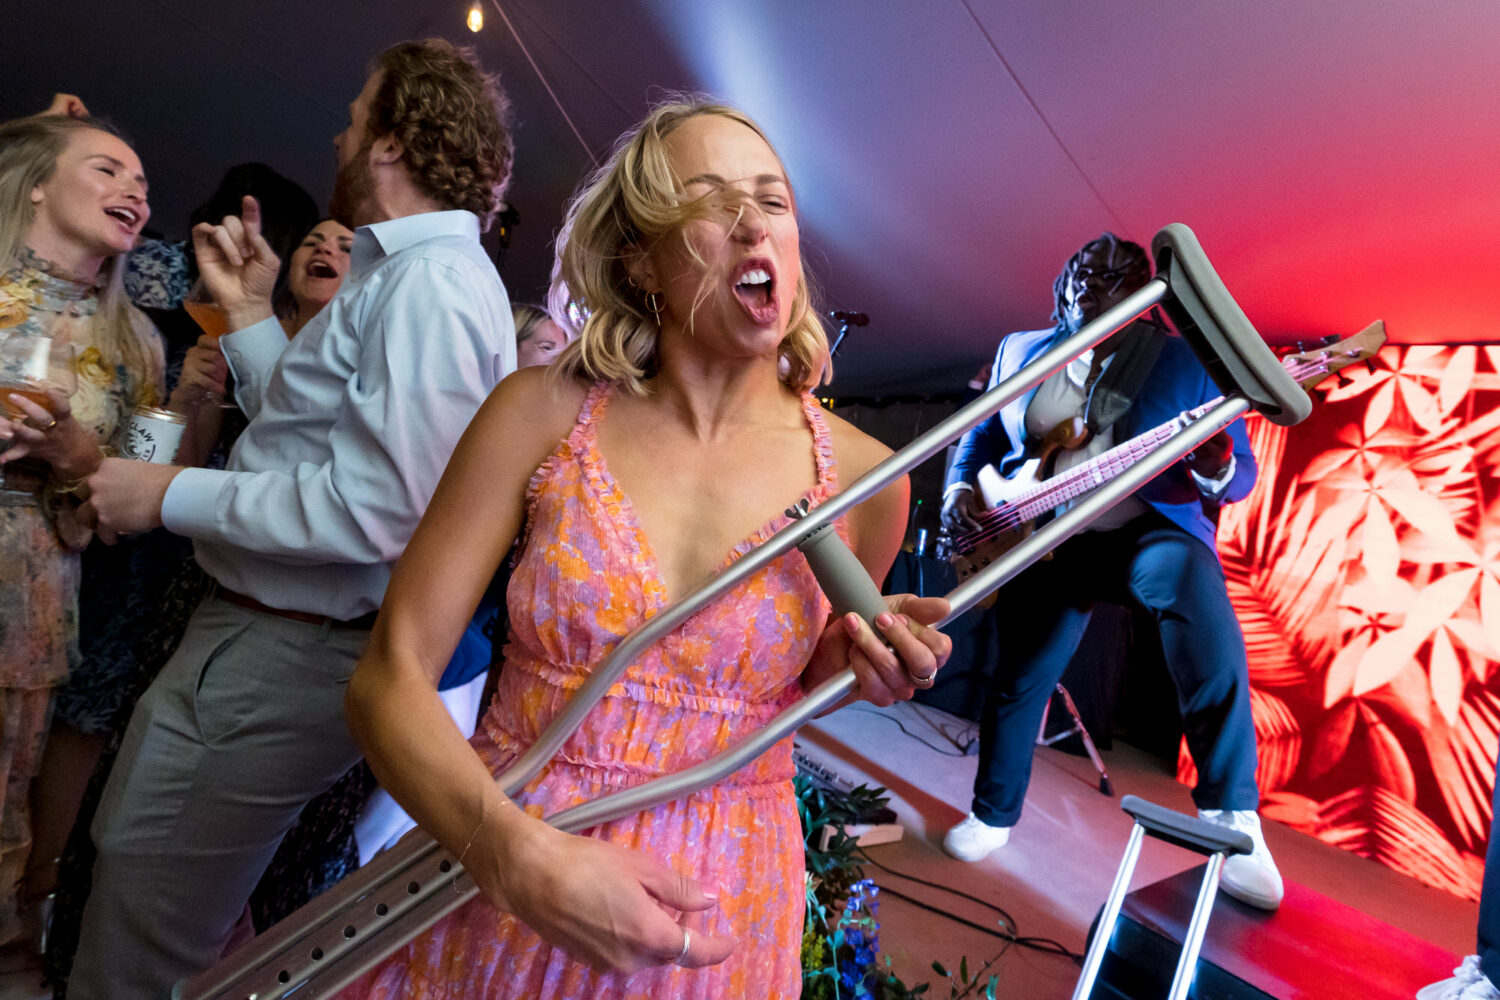 A wedding guest plays the air guitar with her crutch.